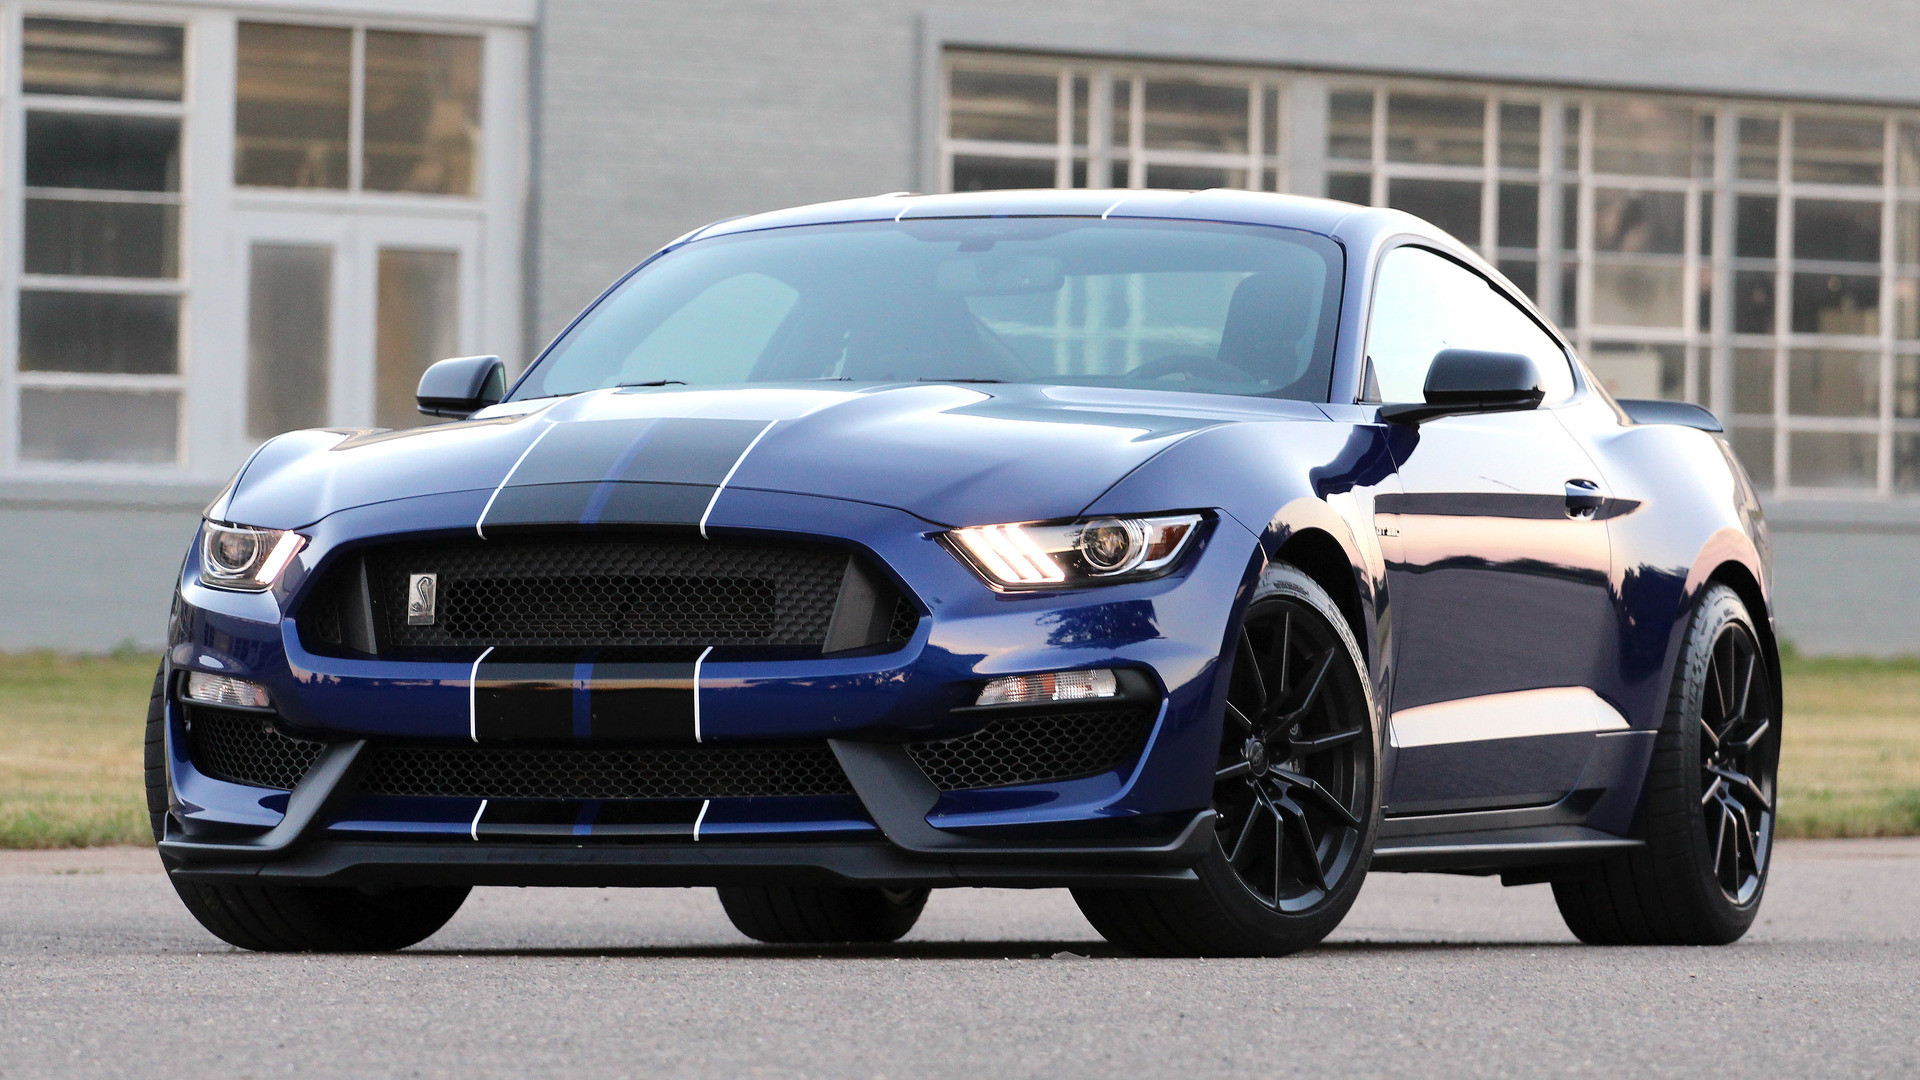 shelby wallpaper,land vehicle,vehicle,car,motor vehicle,shelby mustang